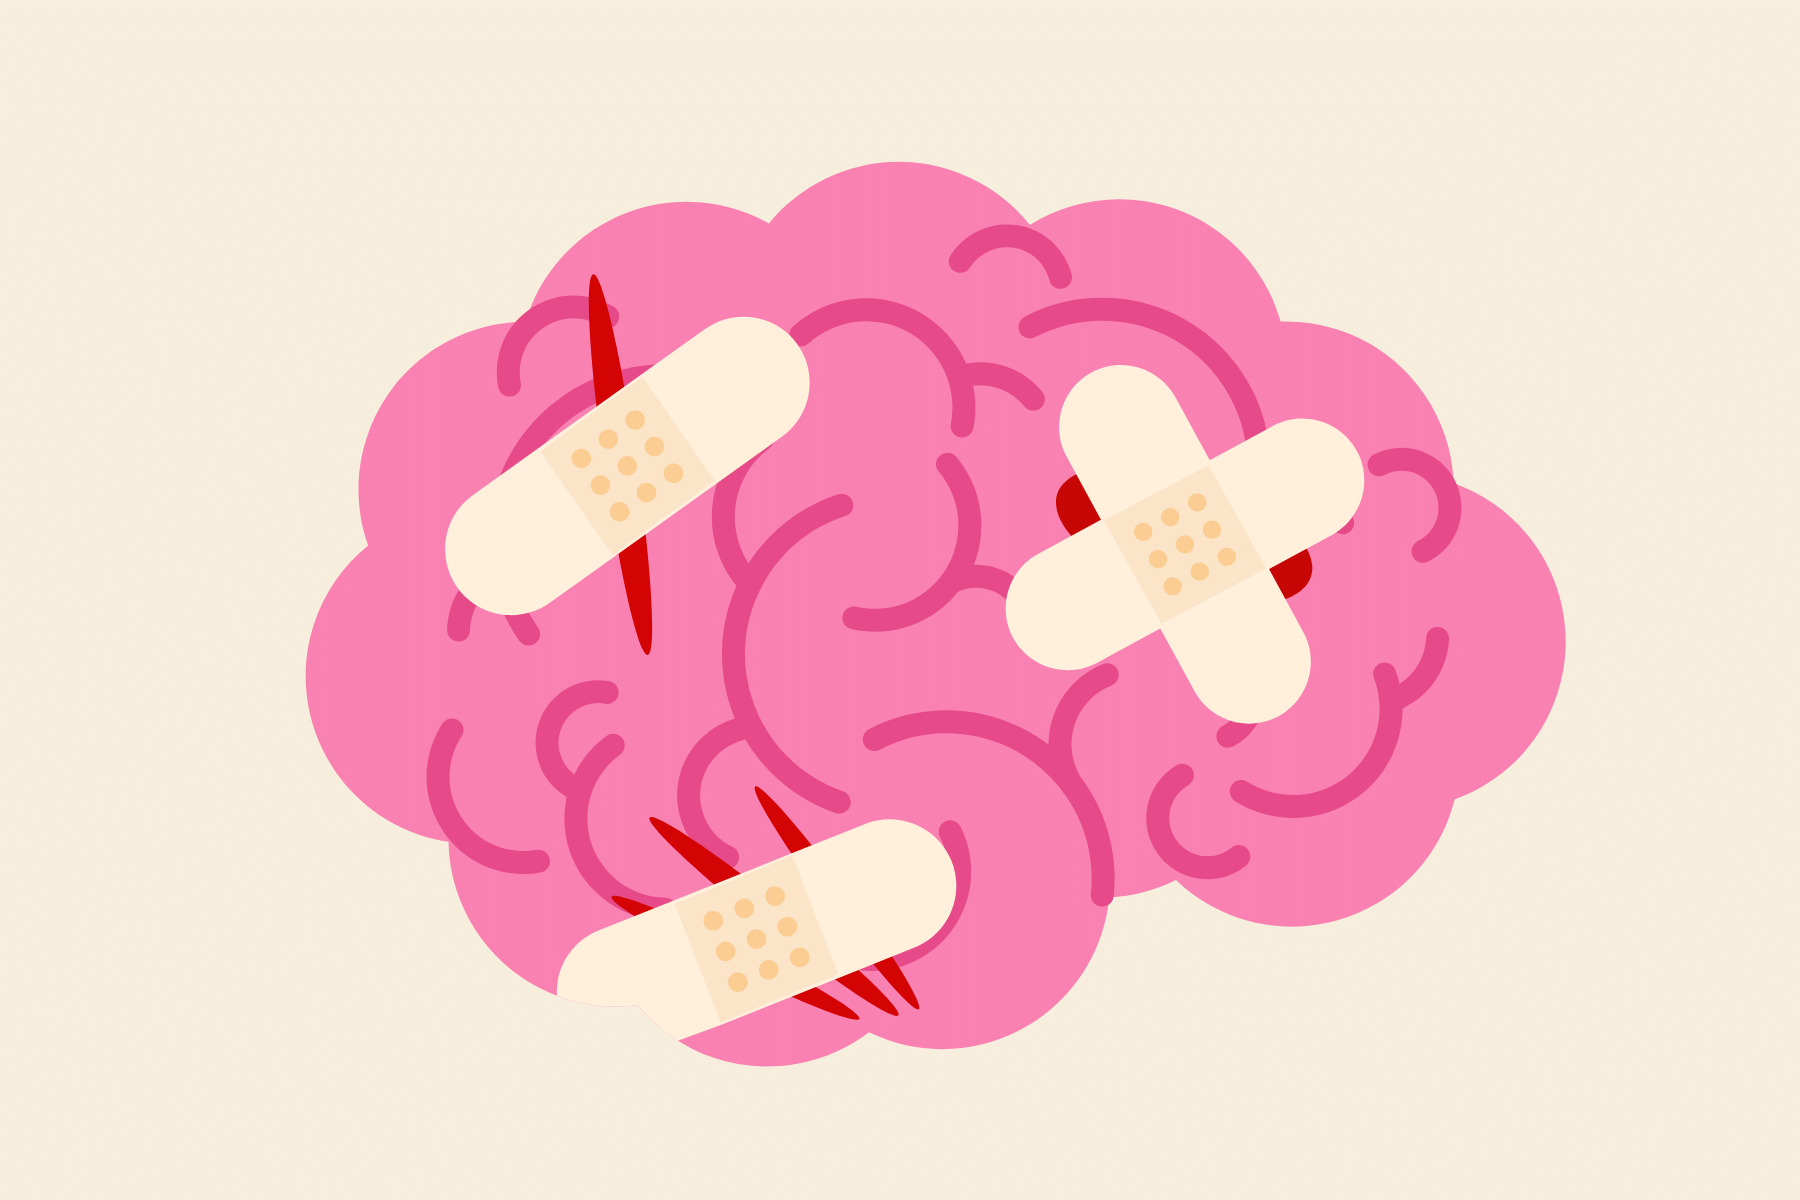 drawn image of a brain with bandages wrapped around it